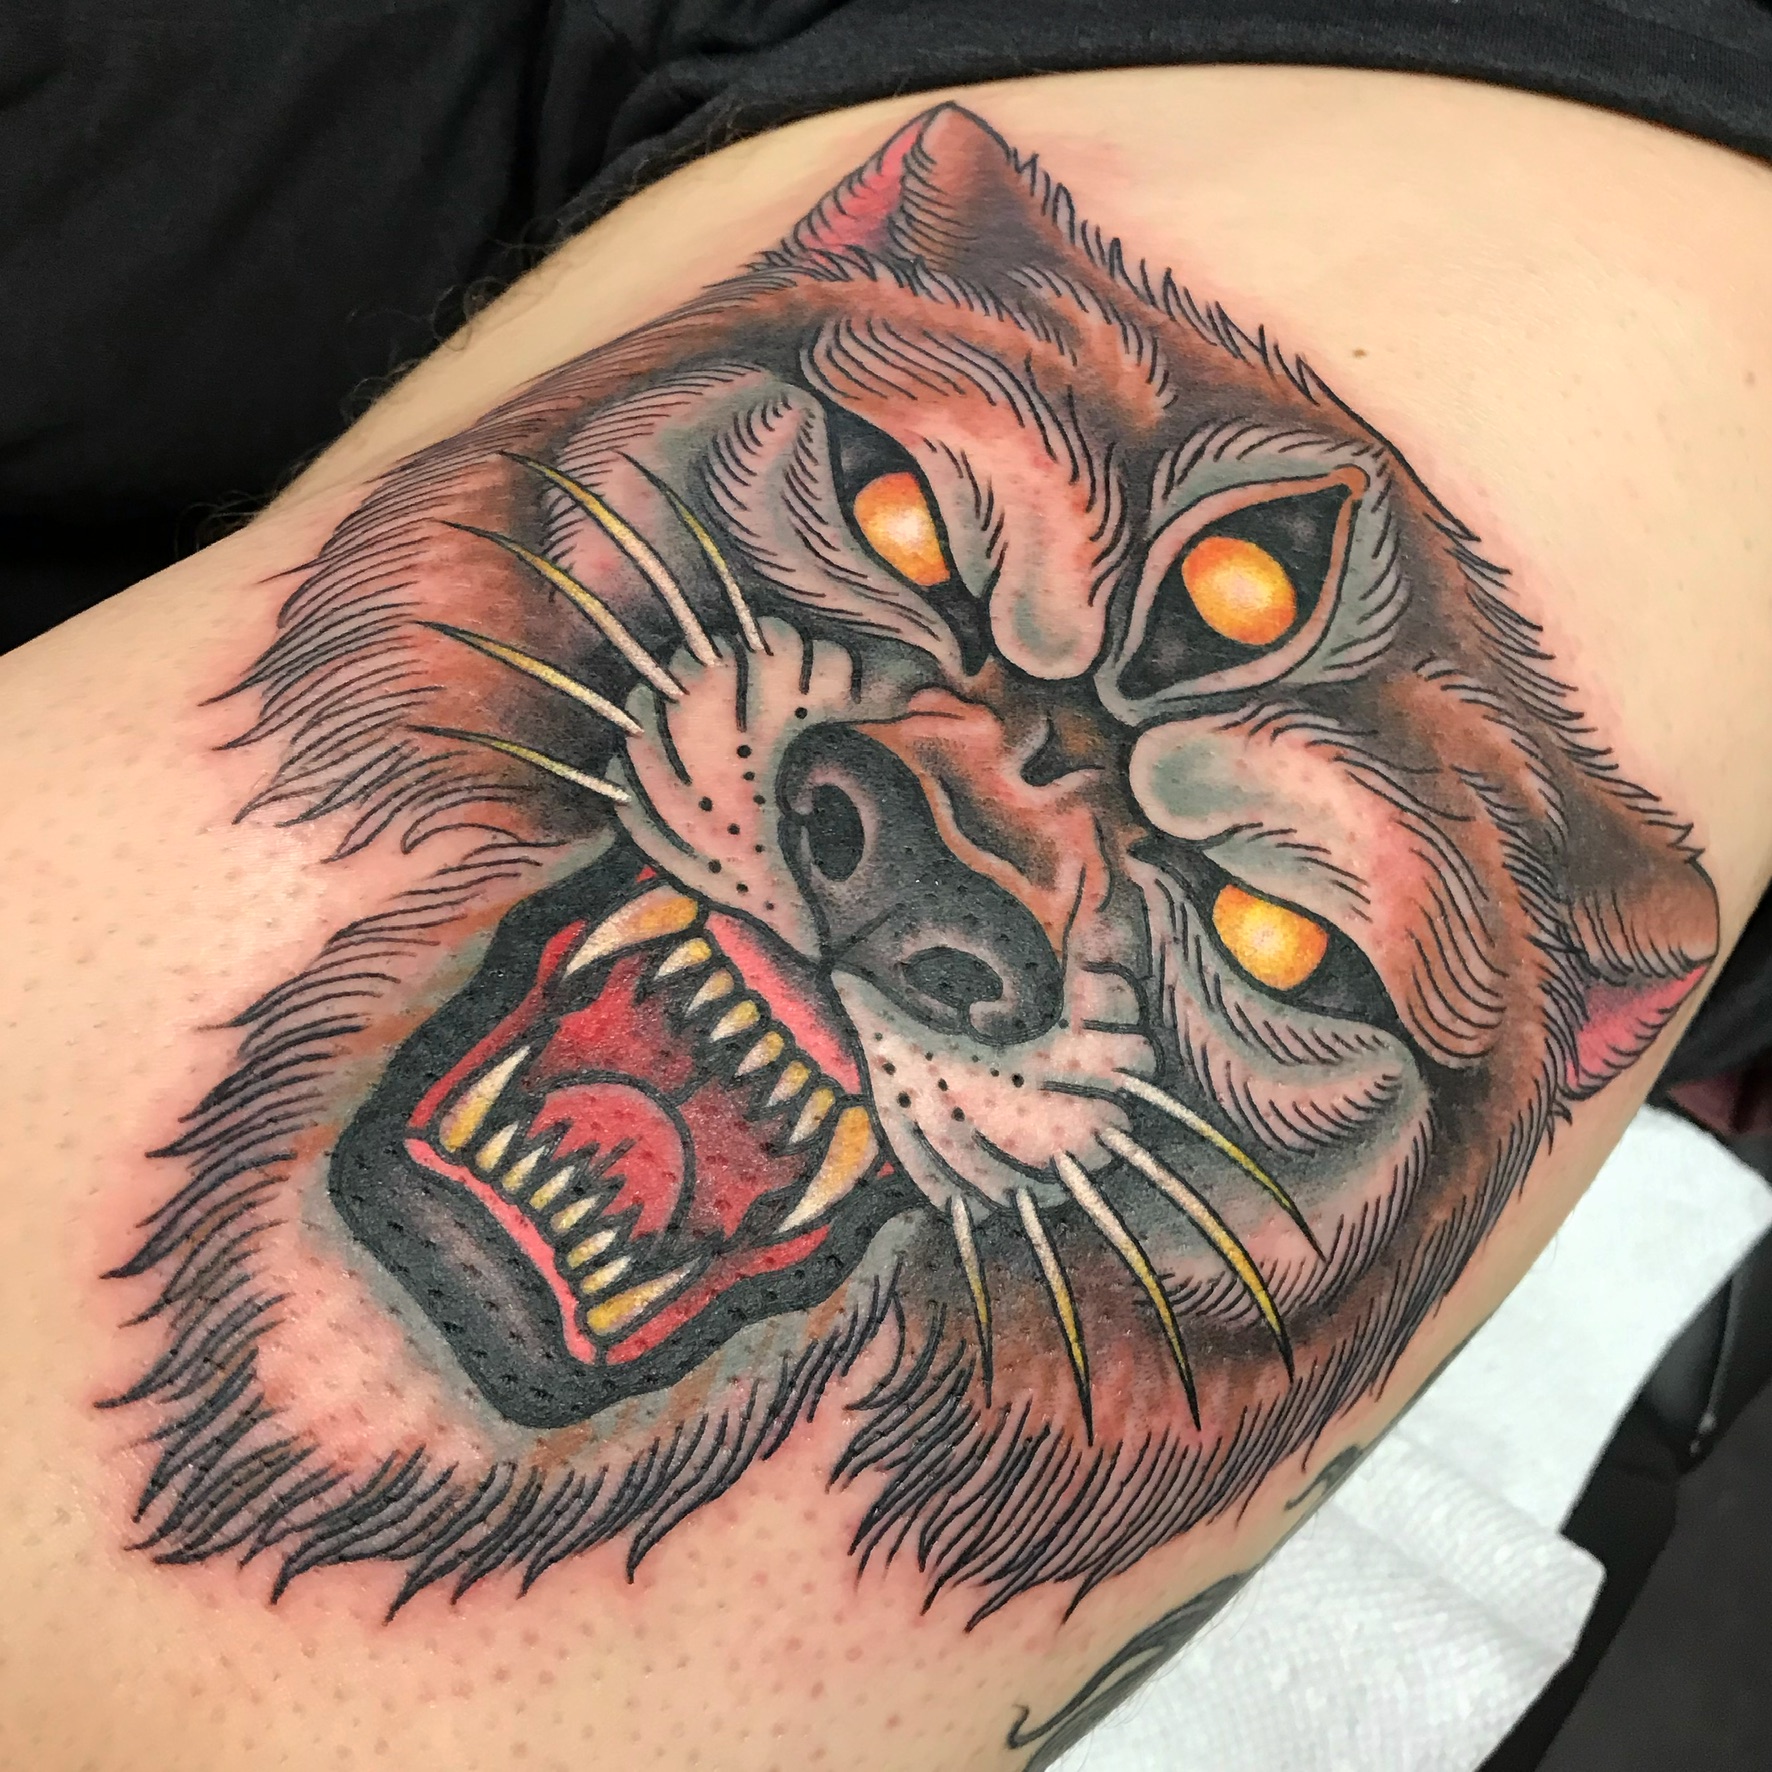 A tattoo of a wolf with yellow eyes